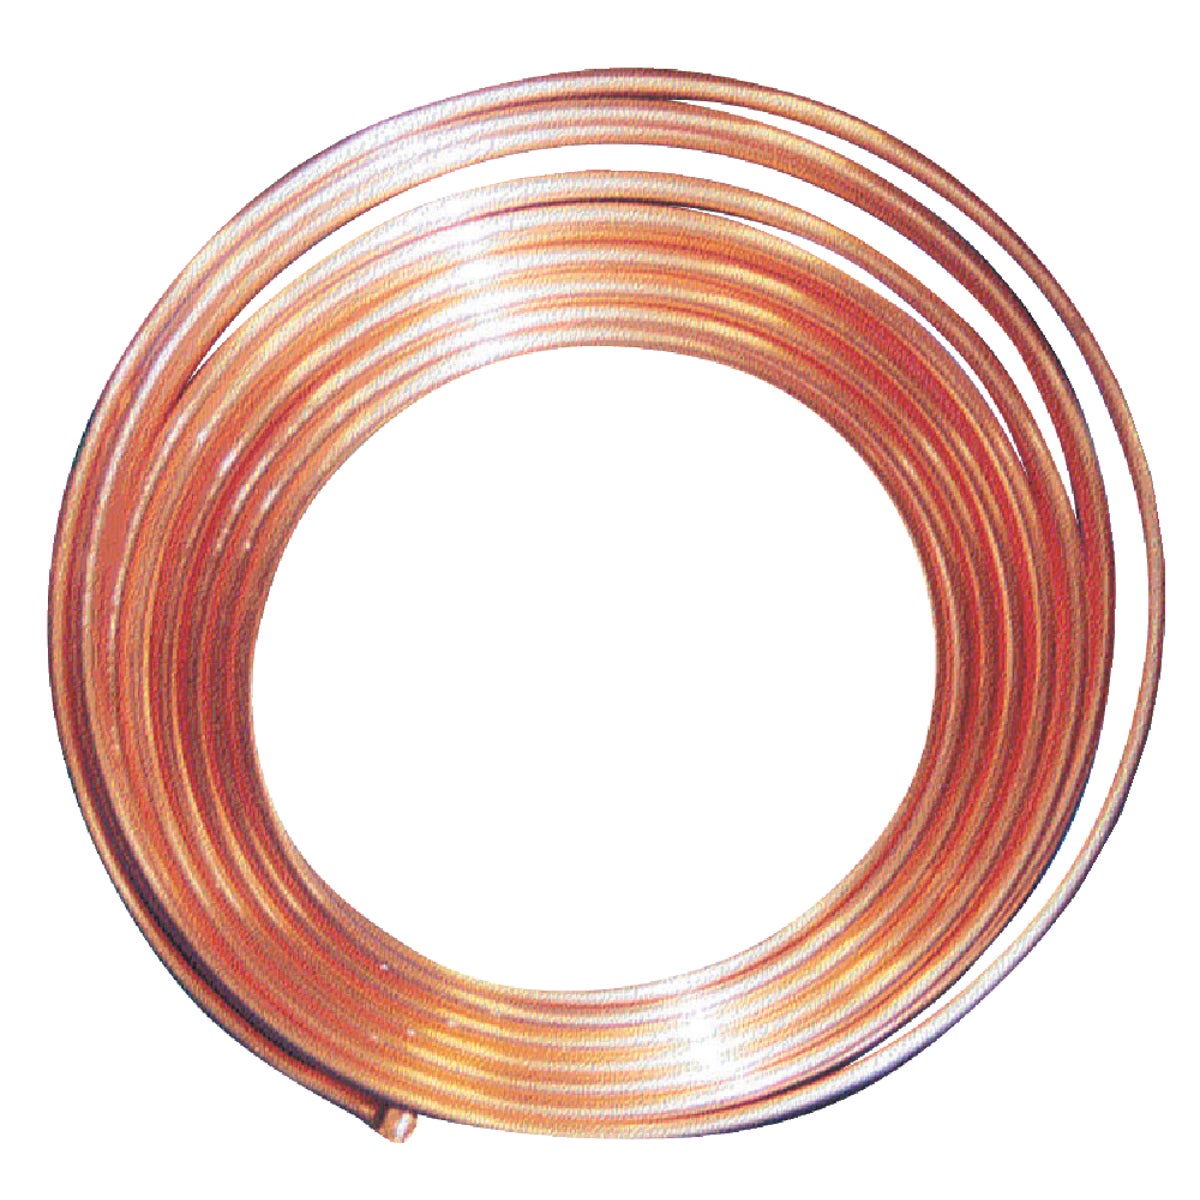 Item 446343, 99% pure copper made to ASTM standard B-88.